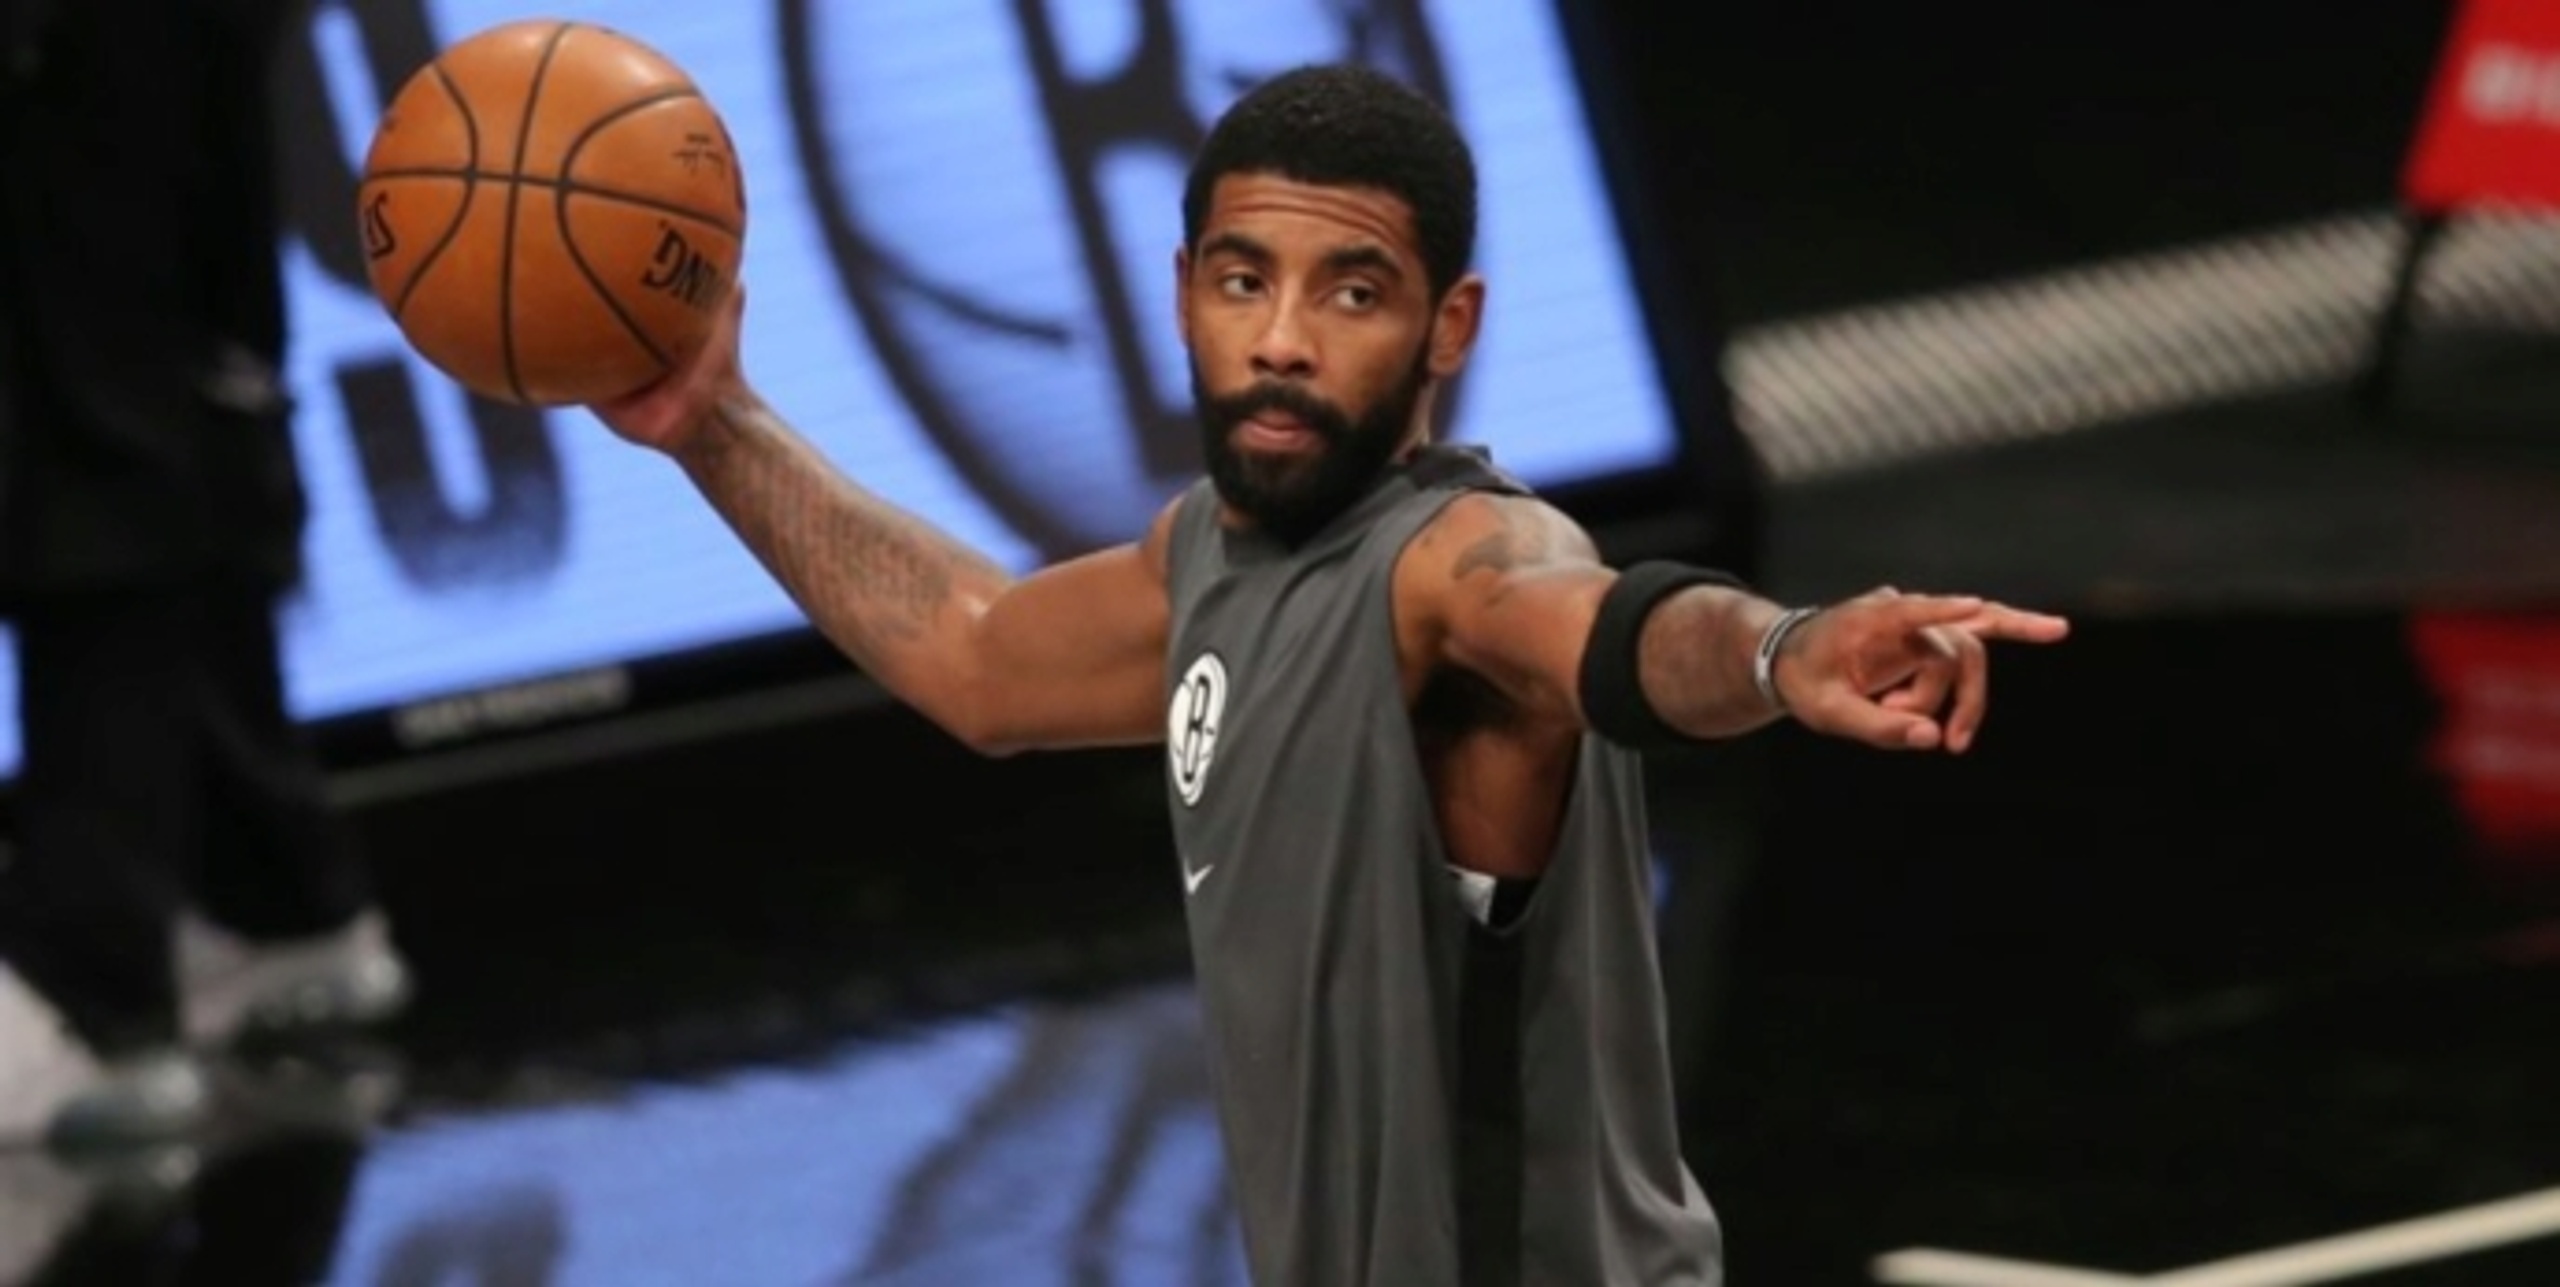 Kyrie Irving recently bought a home for George Floyd's family